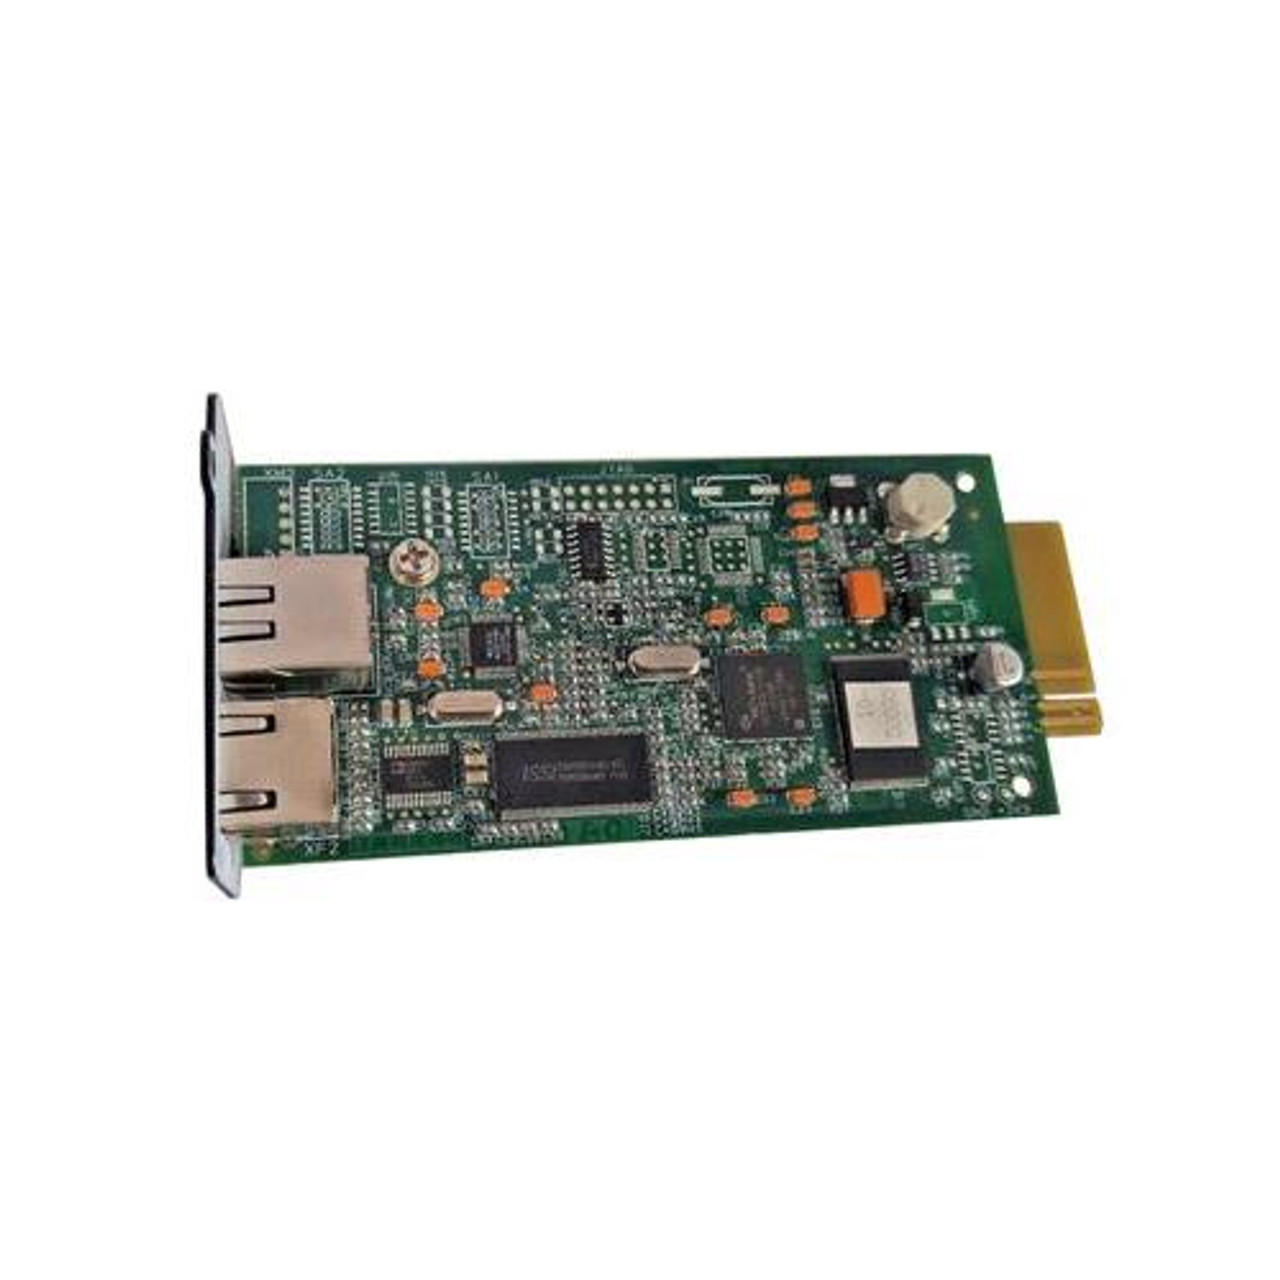 C2356-30001 HP Serial/parallel Interface (lm-815) (box)